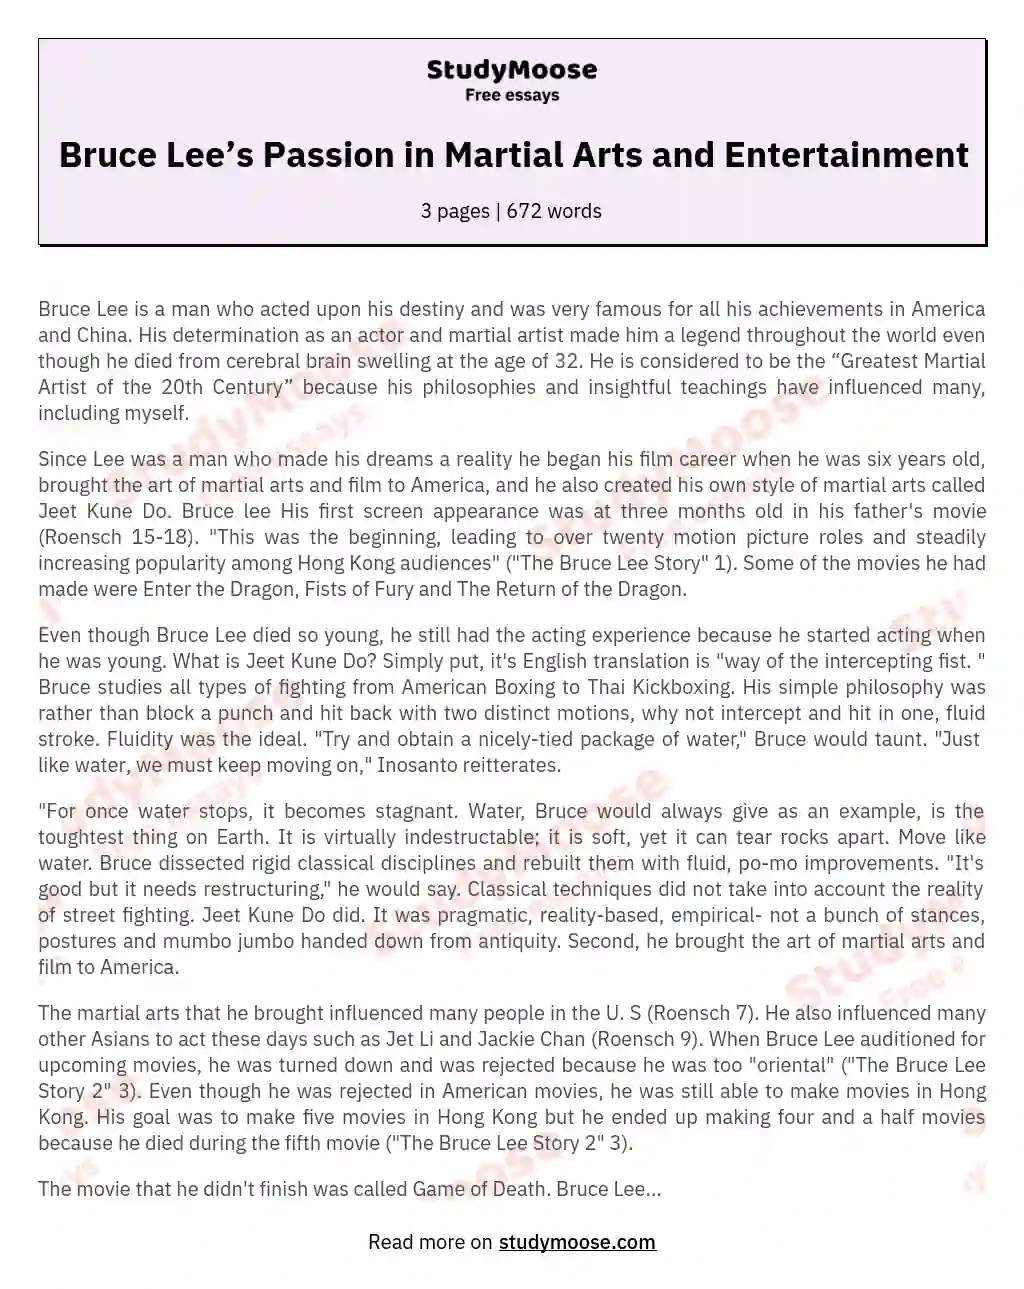 Bruce Lee’s Passion in Martial Arts and Entertainment essay